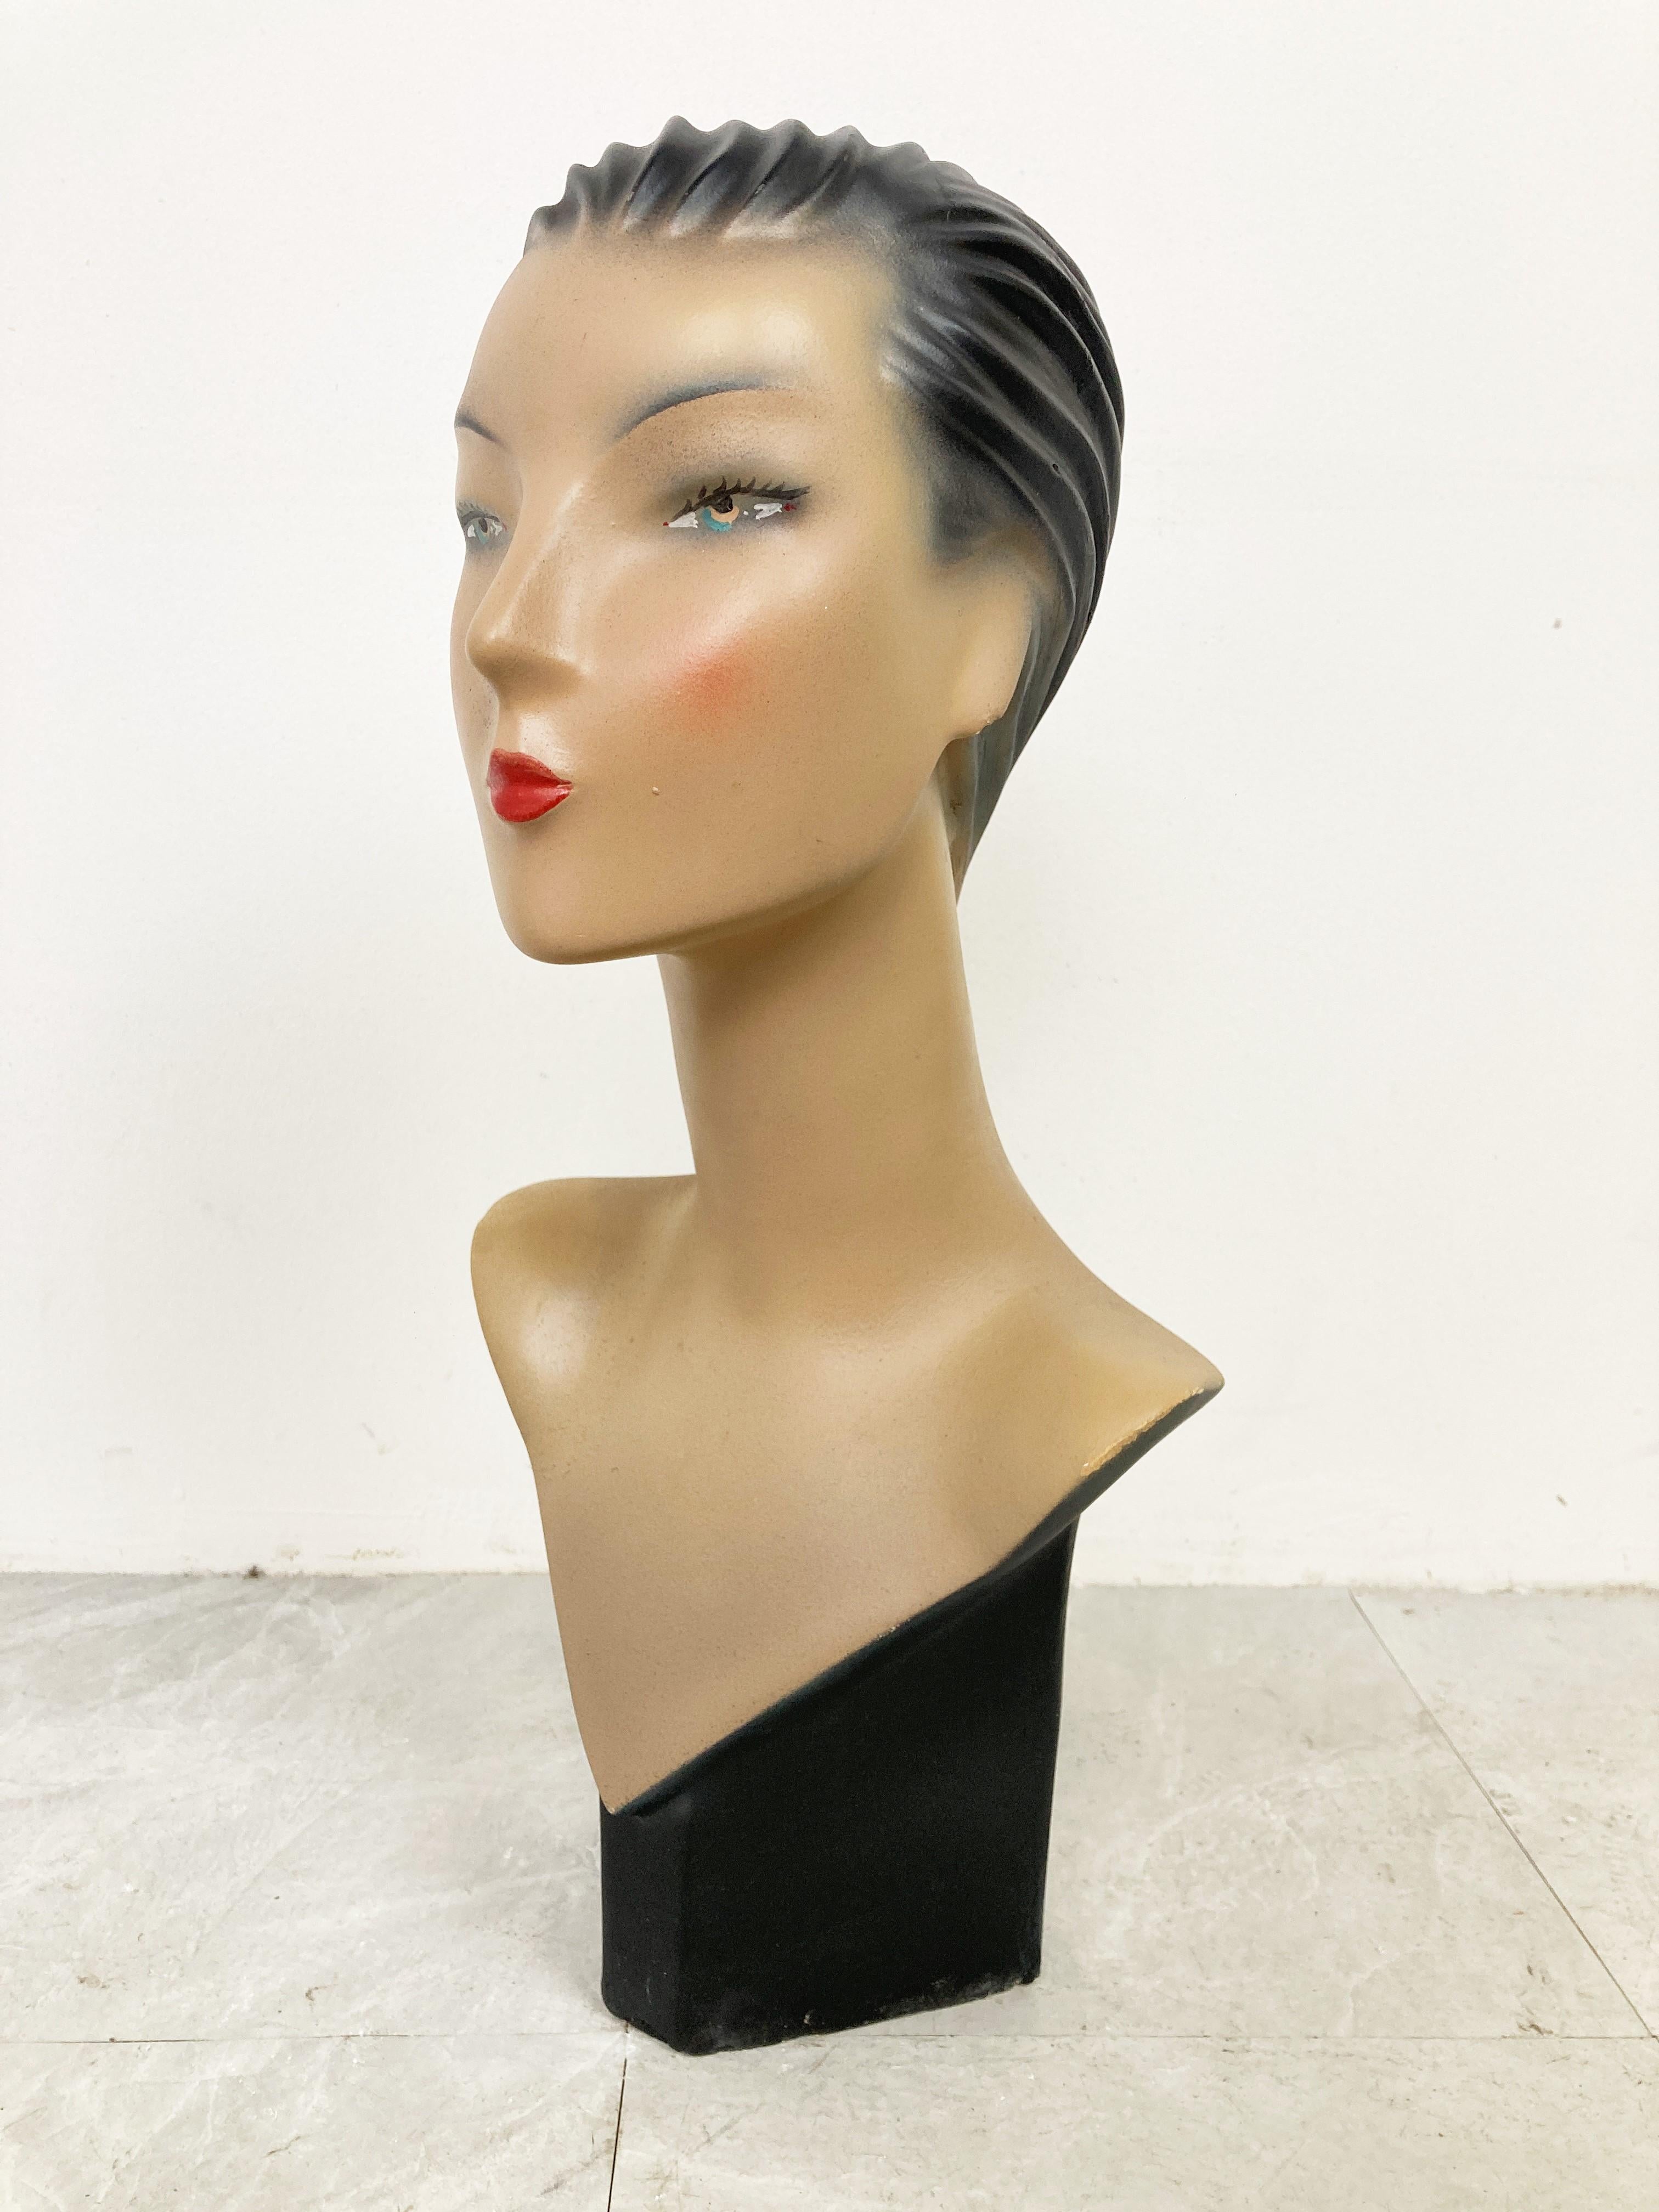 Beautiful female mannequin head made from plaster servings as an advertising bust in a shop.

It was used to be displayed at a shopcounter or vitrine.

Comes from a lot acquired from a clothes shop that stopped activities.

Great decorative item to